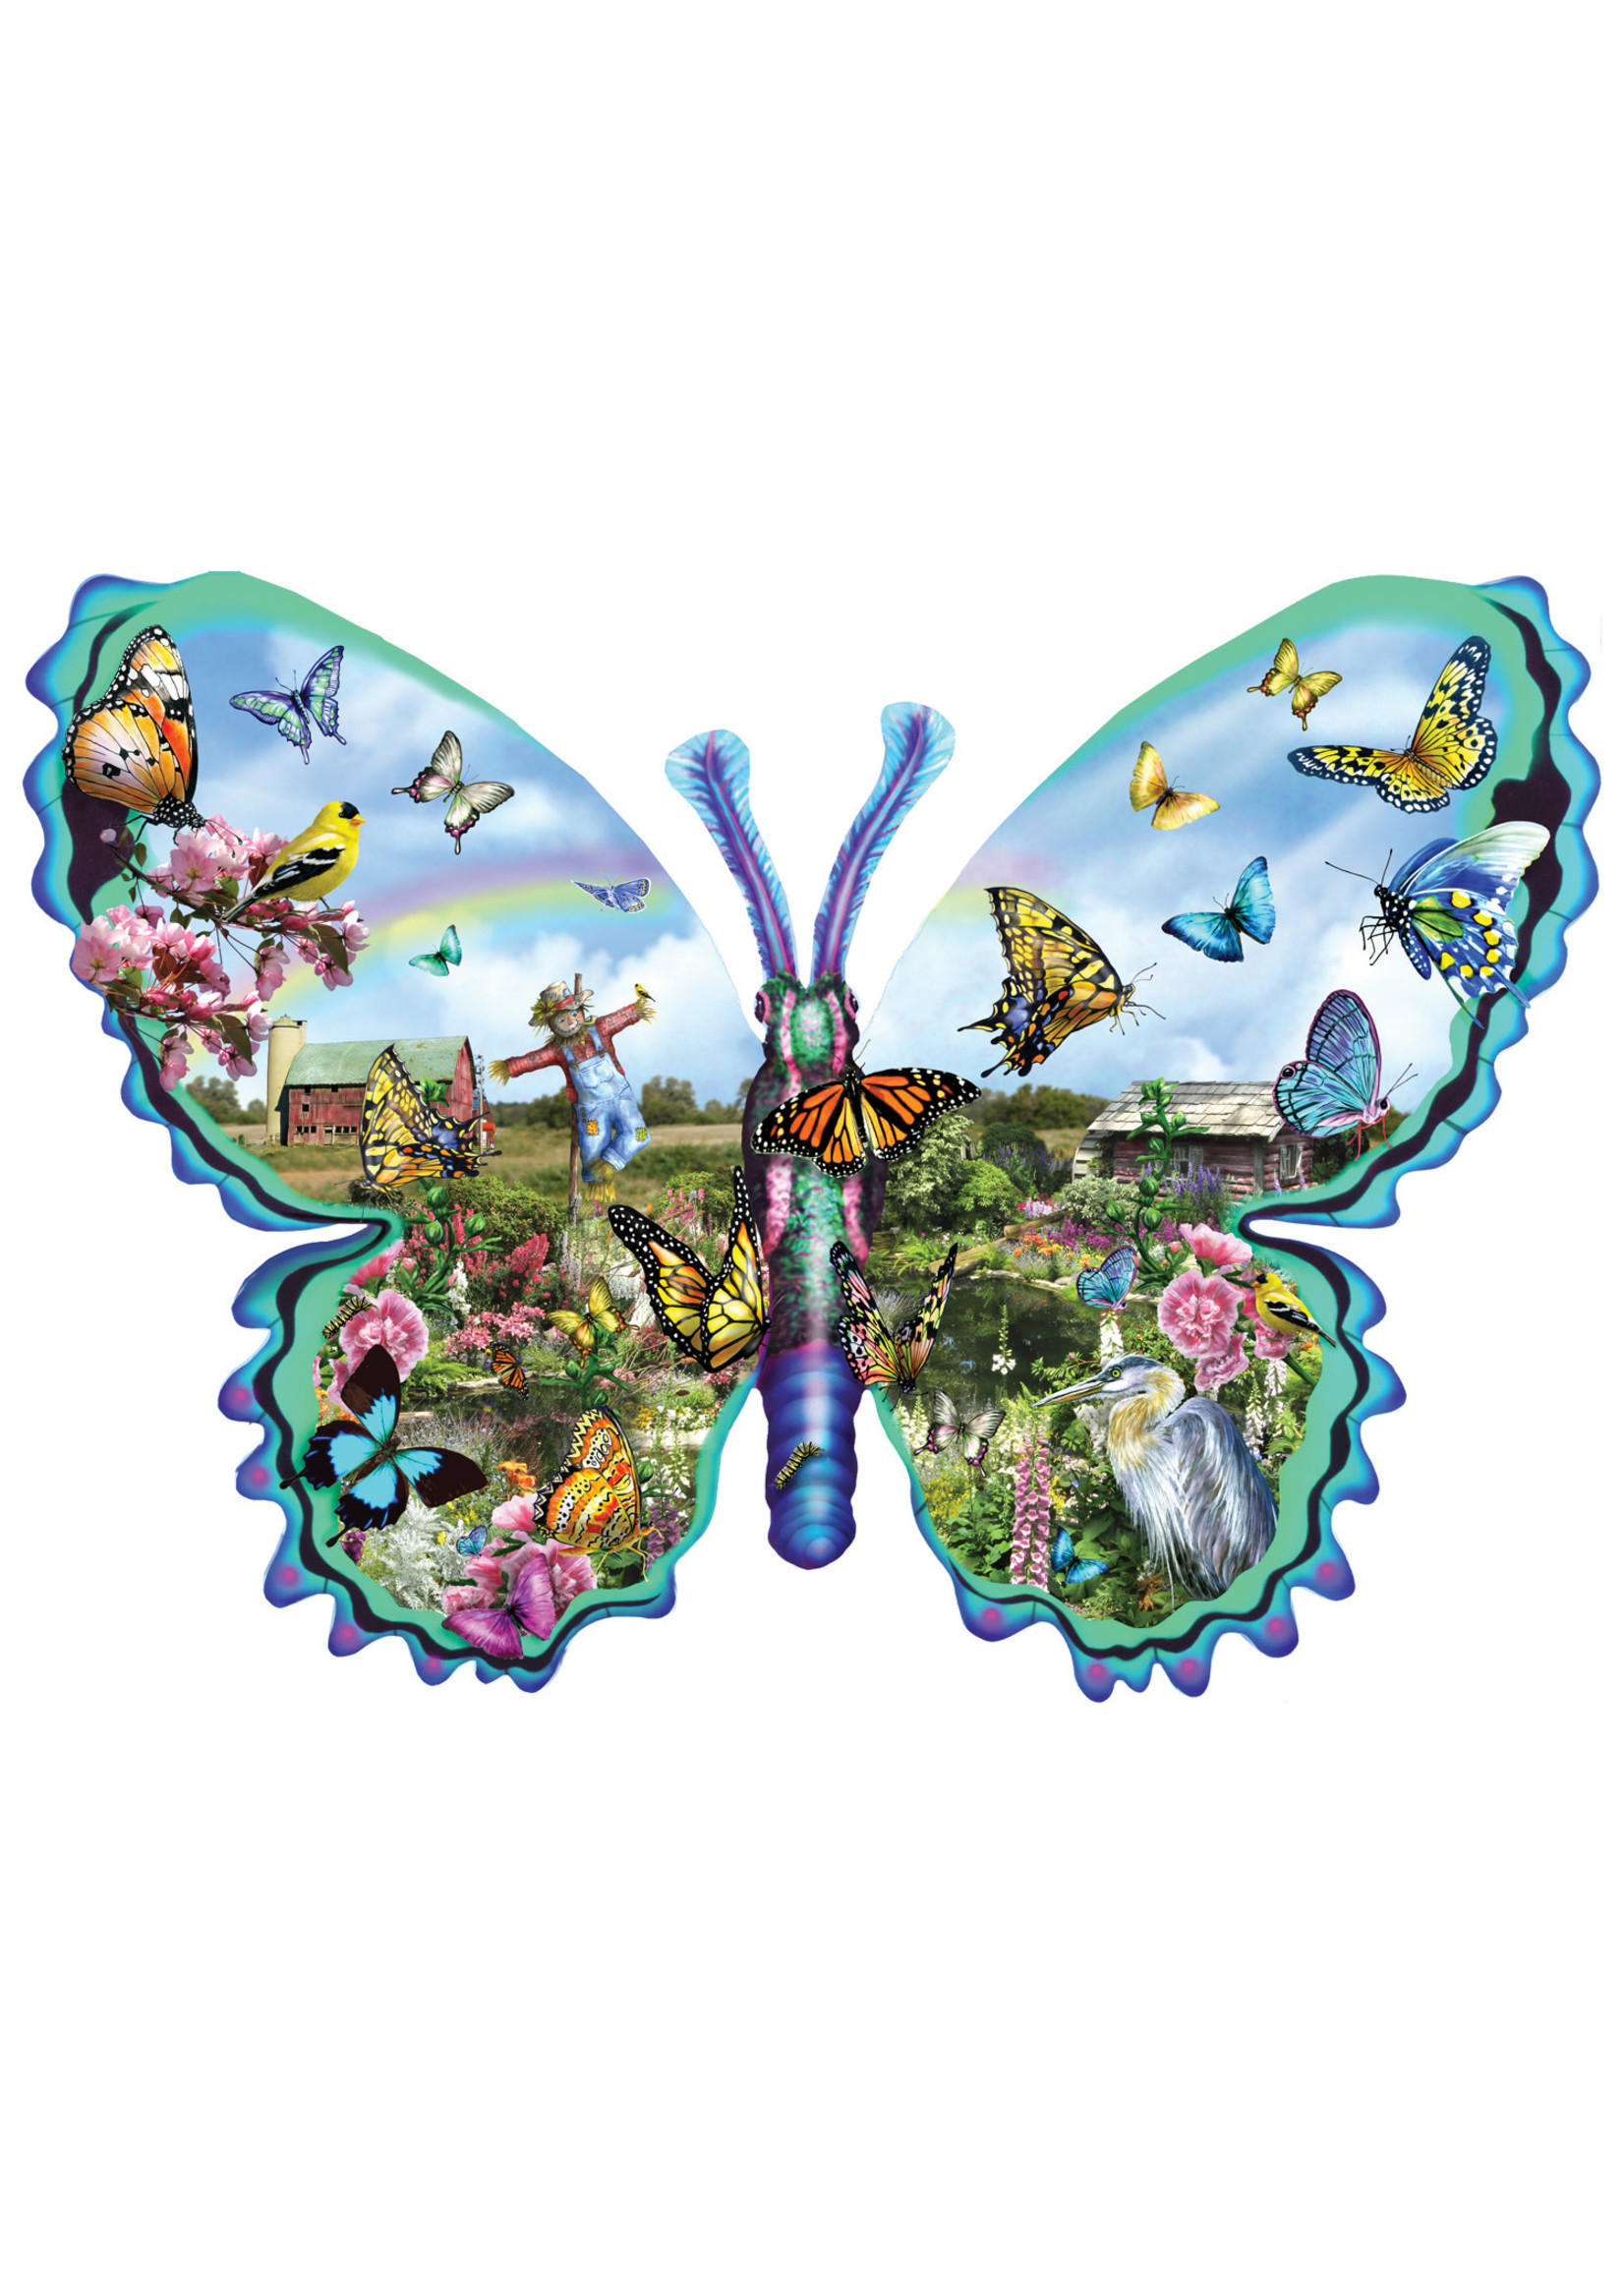 Sunsout Butterfly Farm Special Shaped Puzzle 1000 Pieces